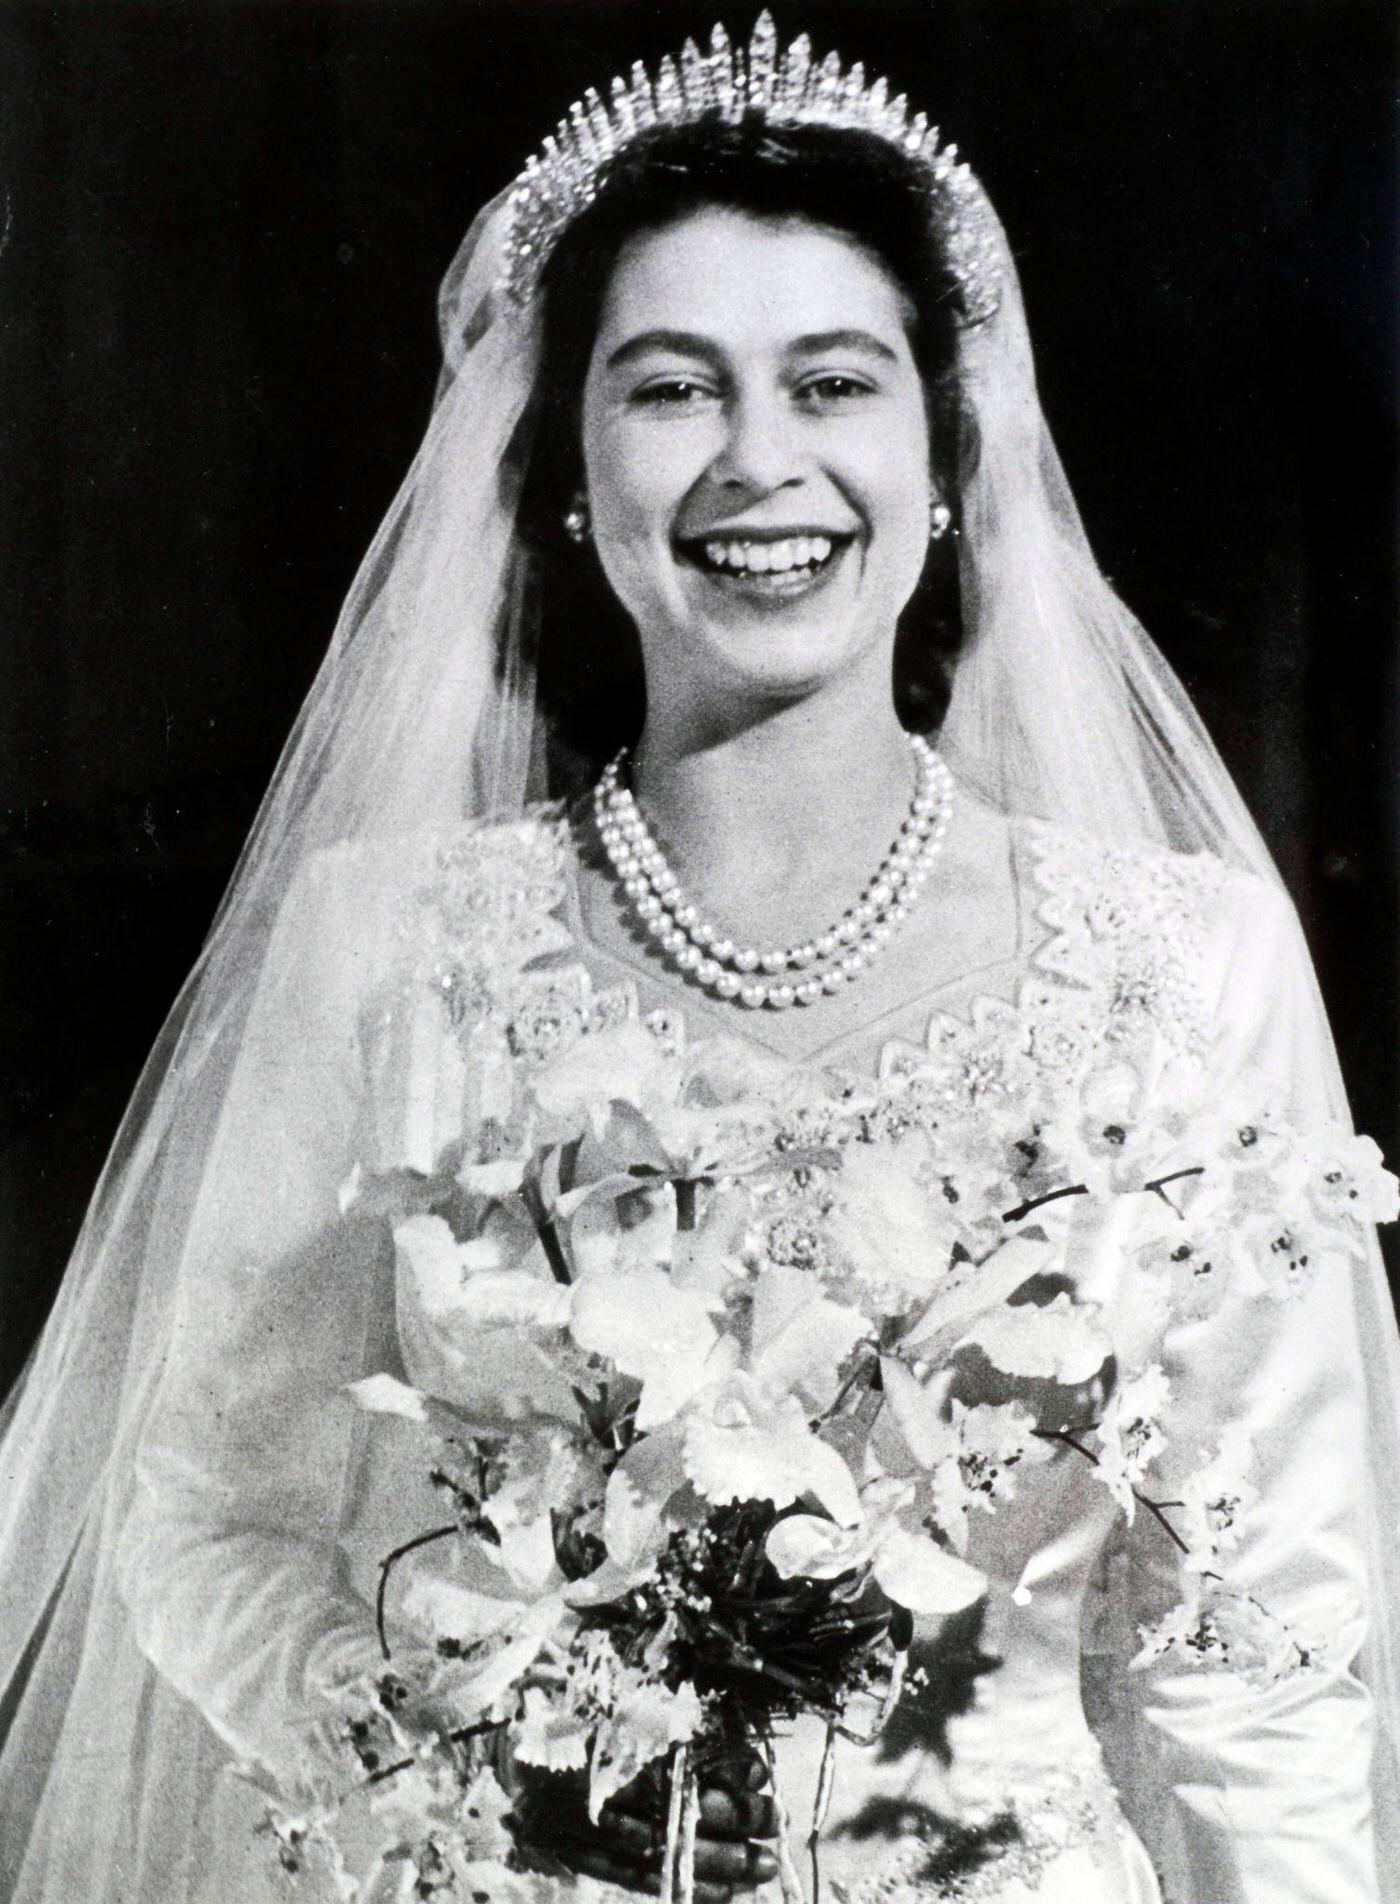 The wedding of Princess Elizabeth and the Duke of Edinburgh showing the Princess looking radiant after the wedding at Westminster Abbey, Buckingham Palace, London, England, 20 November 1947.